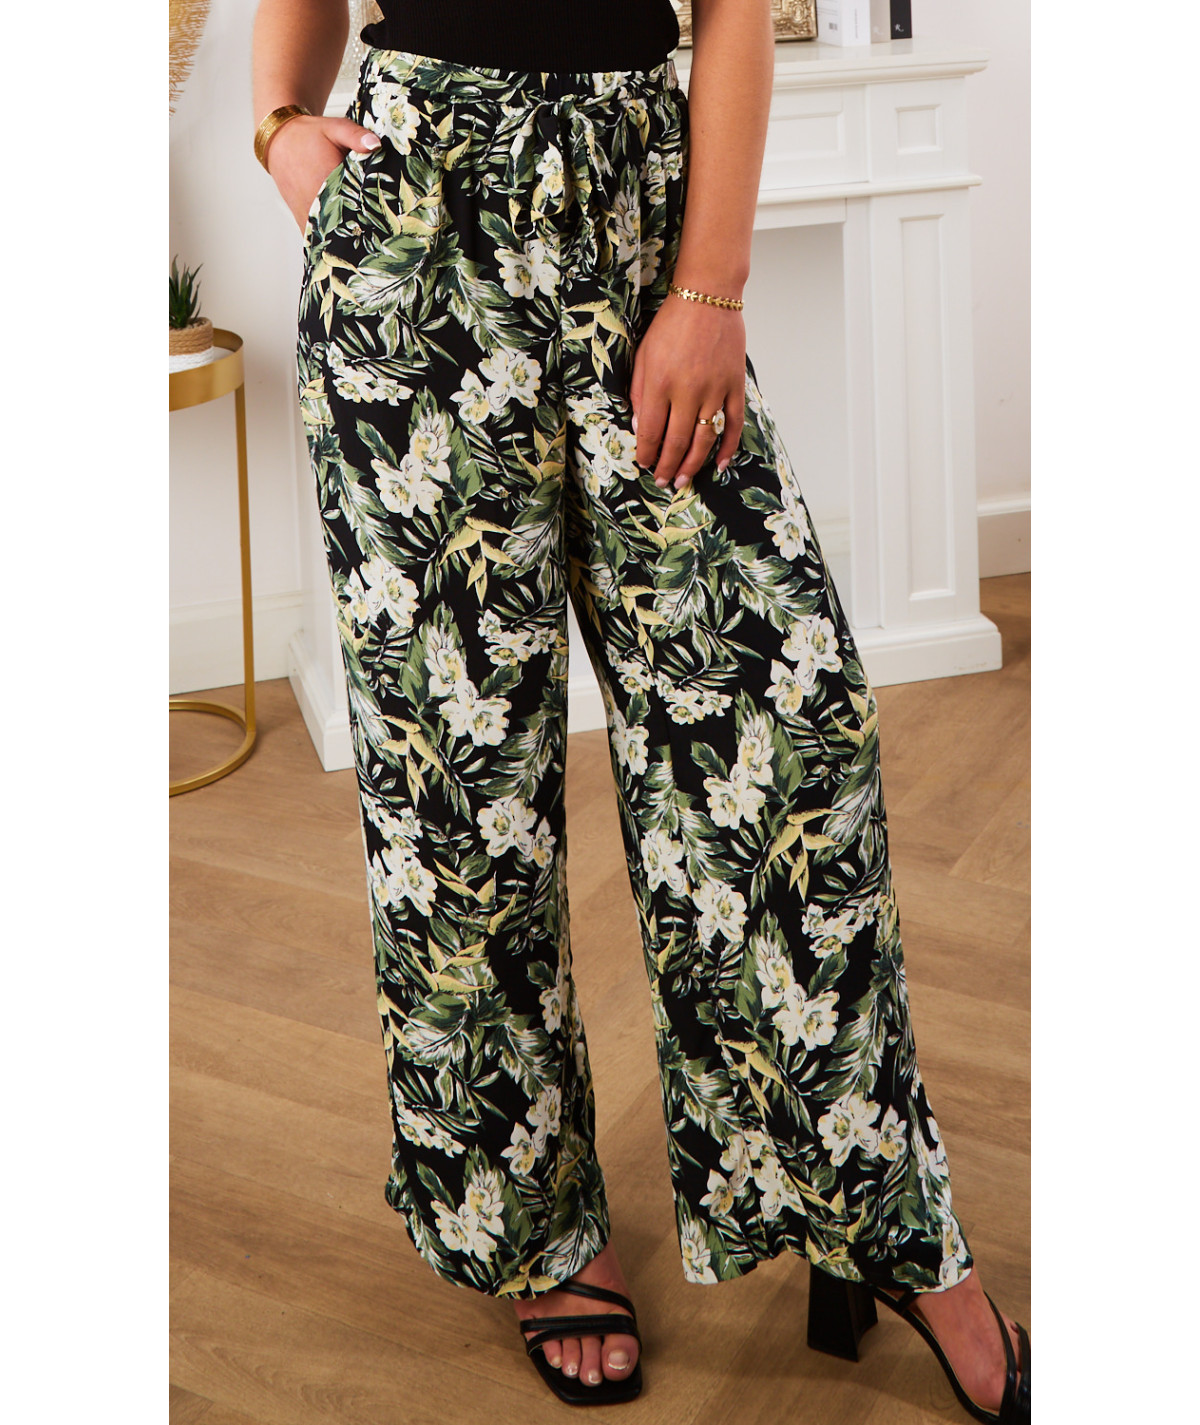 flowing black trousers with nature print and belt